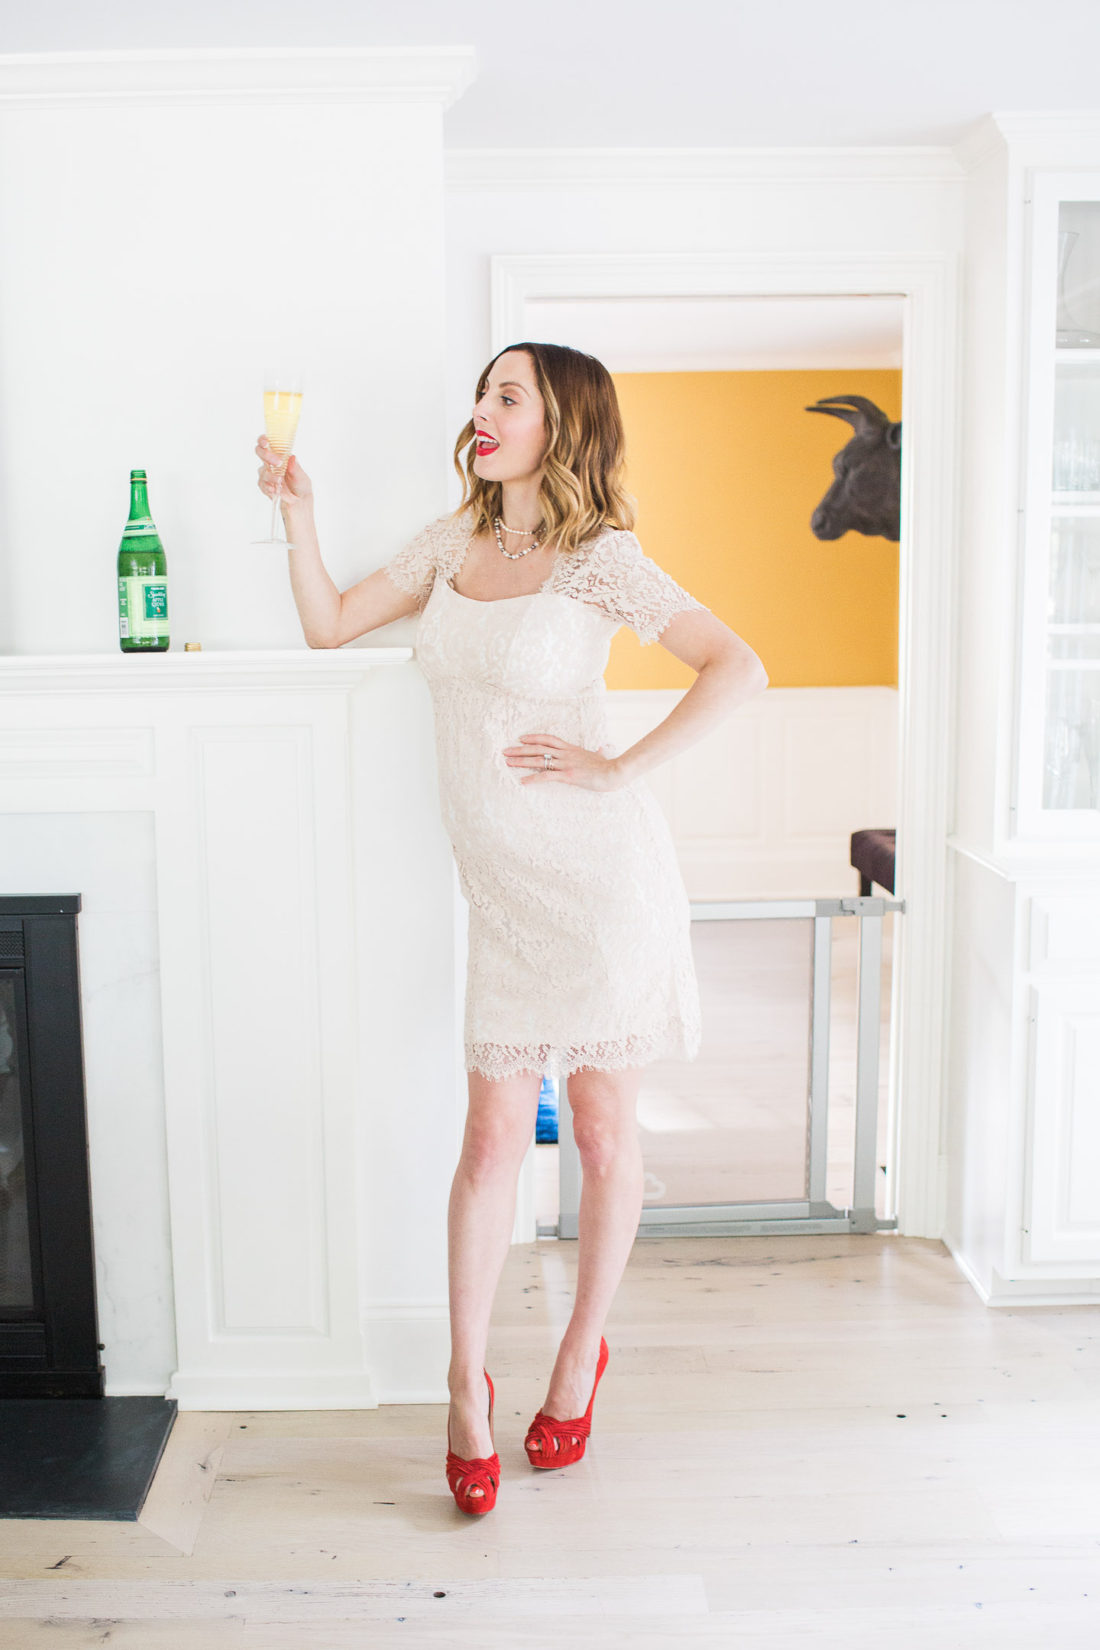 Eva Amurri Martino of lifestyle and motherhood blog Happily Eva After, standing in a champagne colored lace dress and red louboutin platform pumps, holding a glass of sparkling cider in a celebratory toast